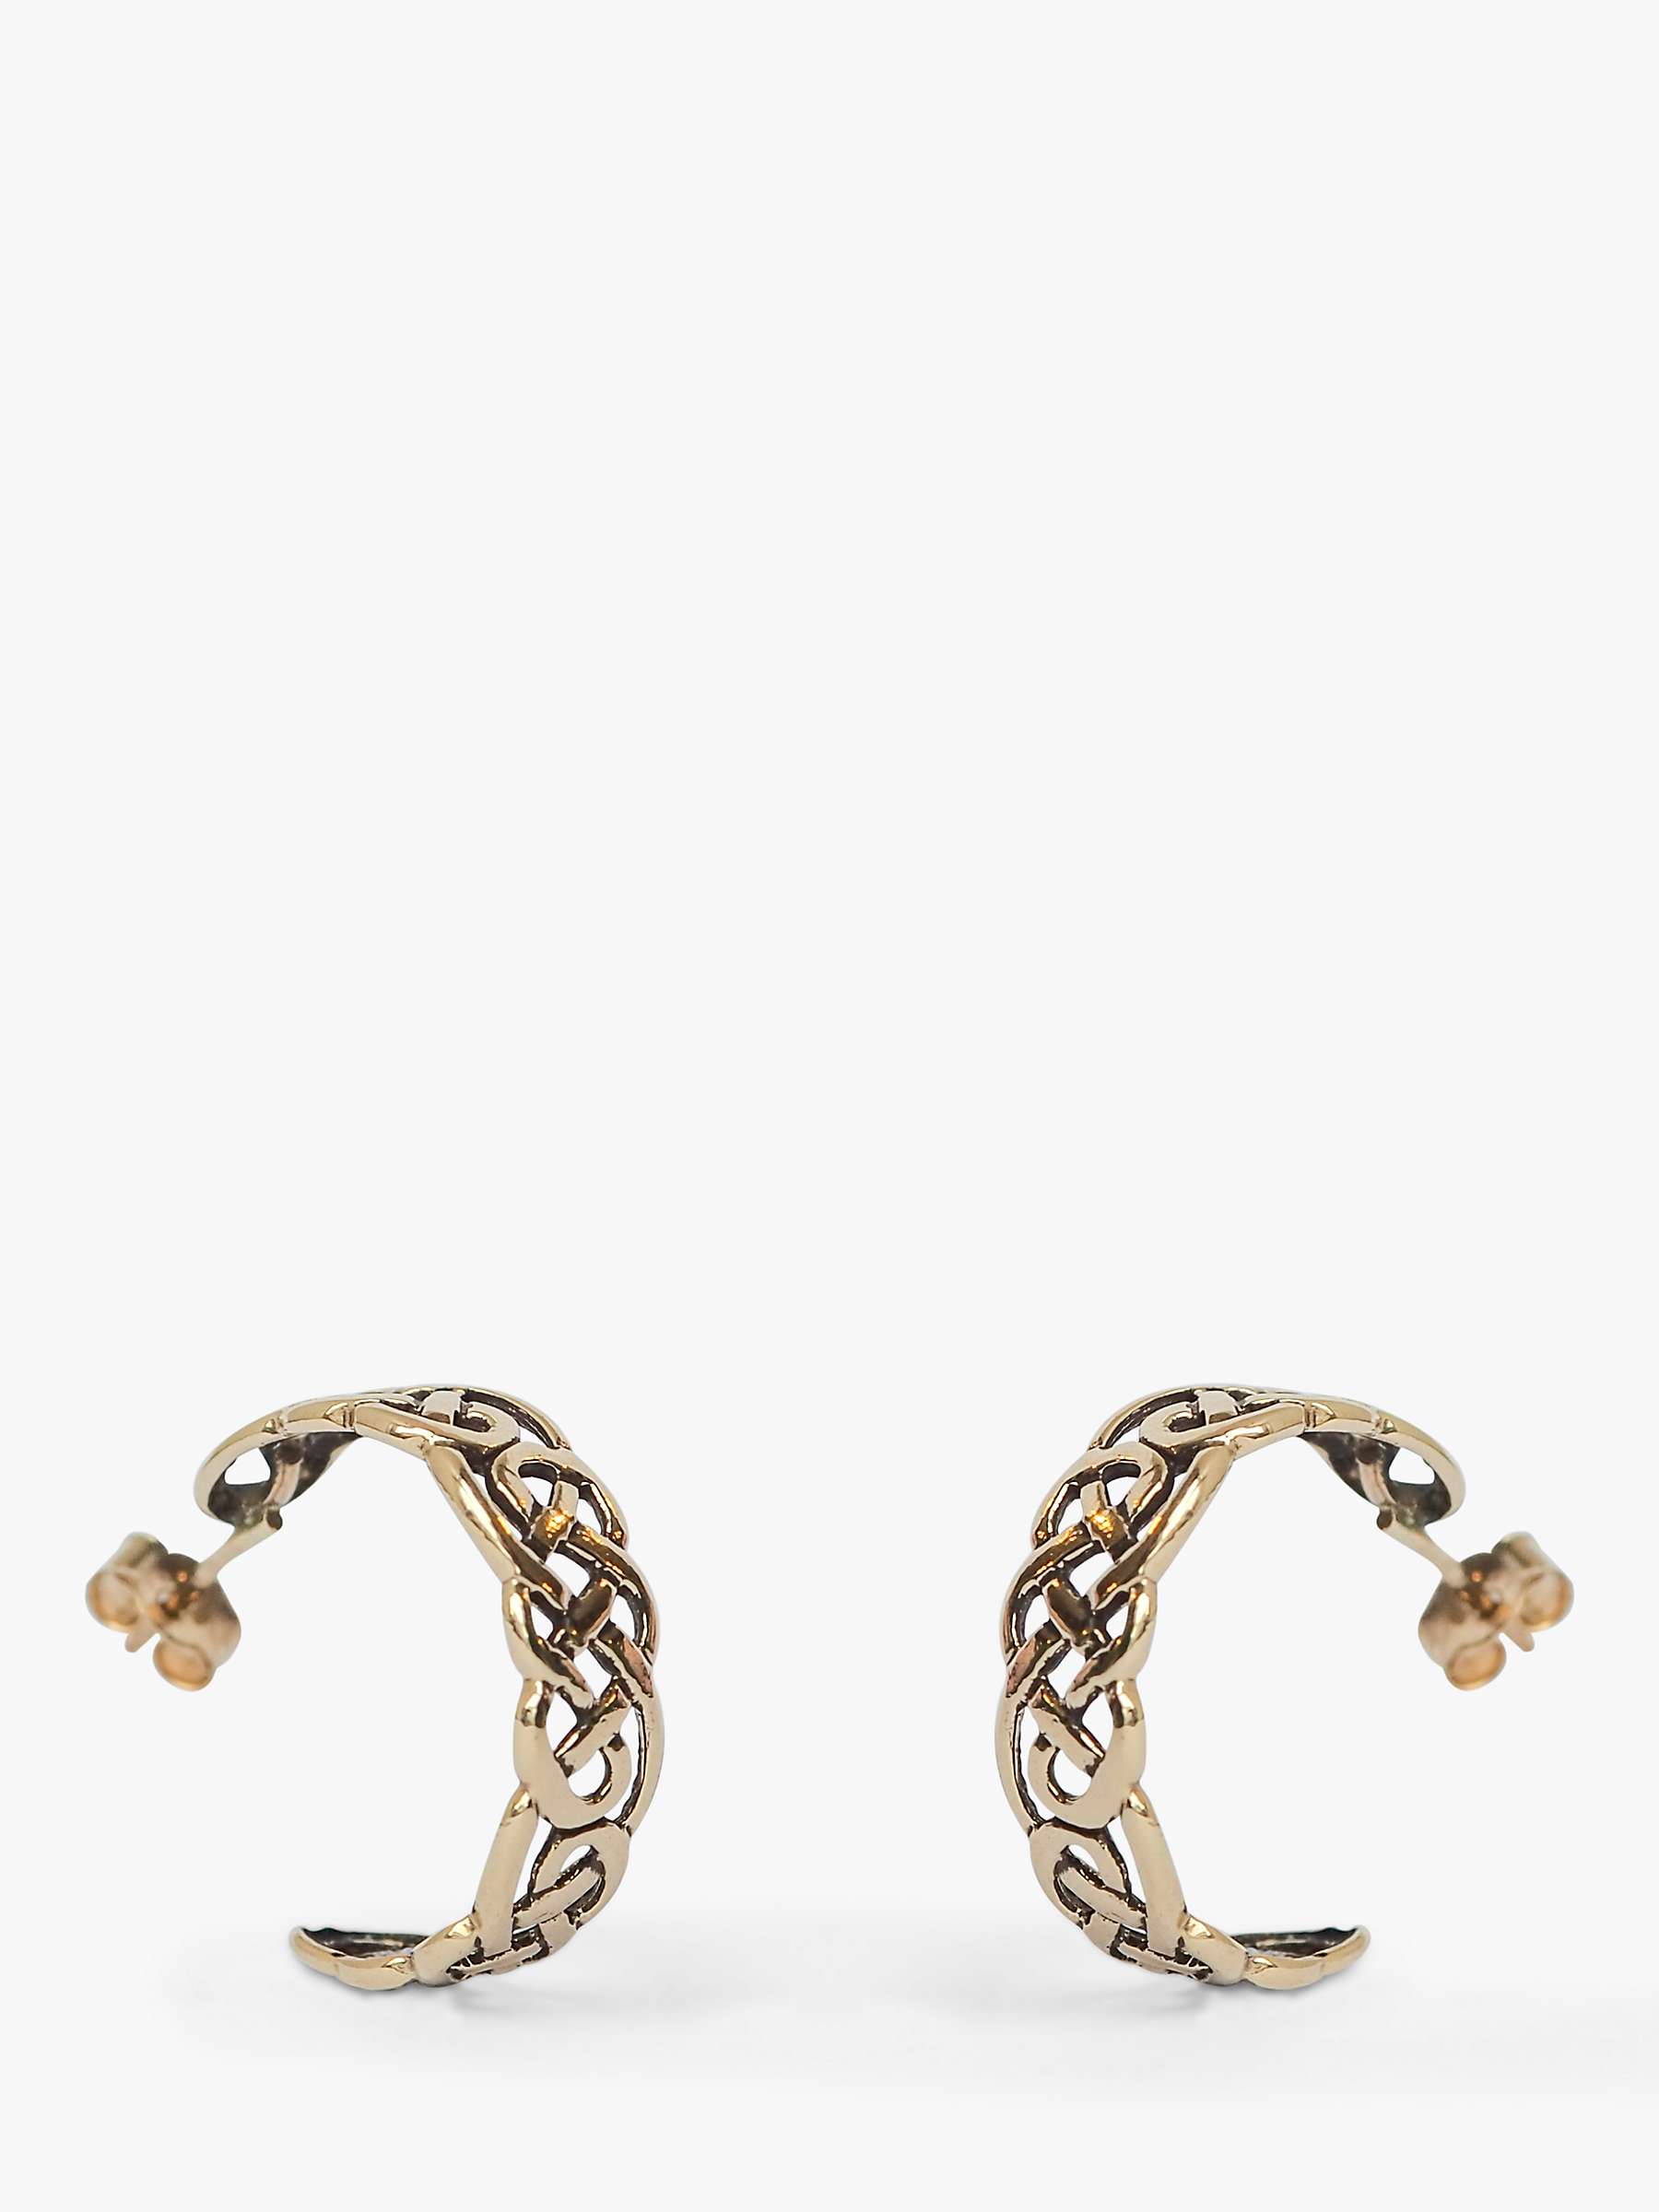 Buy L & T Heirlooms Second Hand 9ct Yellow Gold Celtic Weave Hoop Earrings, Gold Online at johnlewis.com